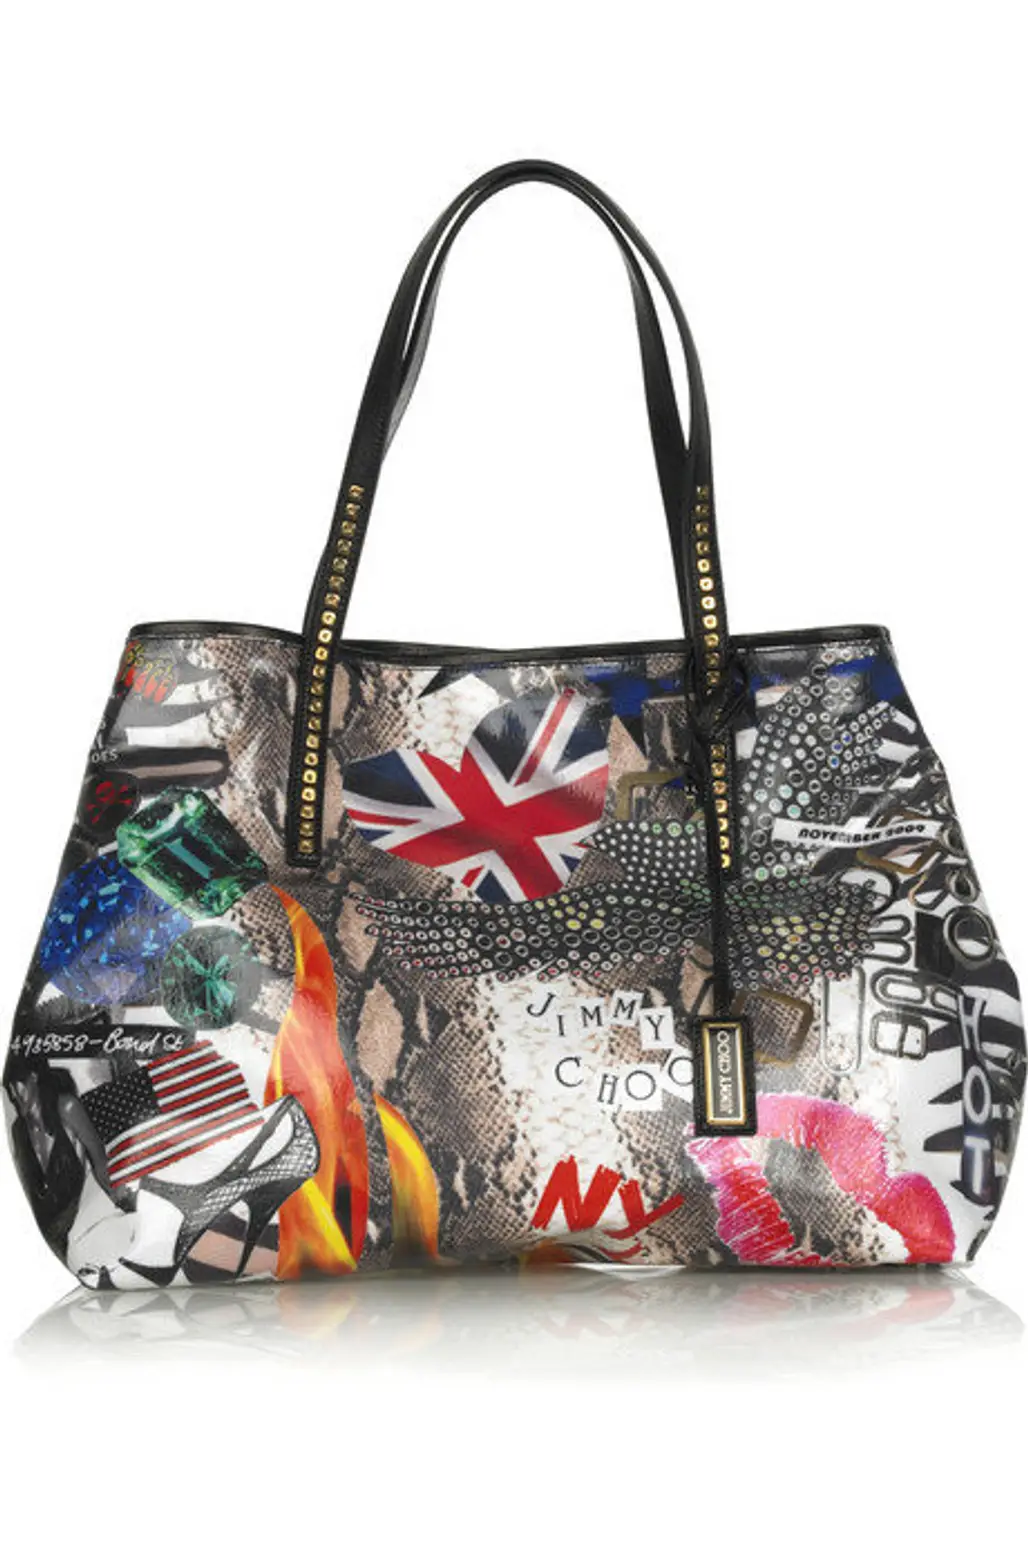 Jimmy Choo Limited Edition PEP Printed Tote